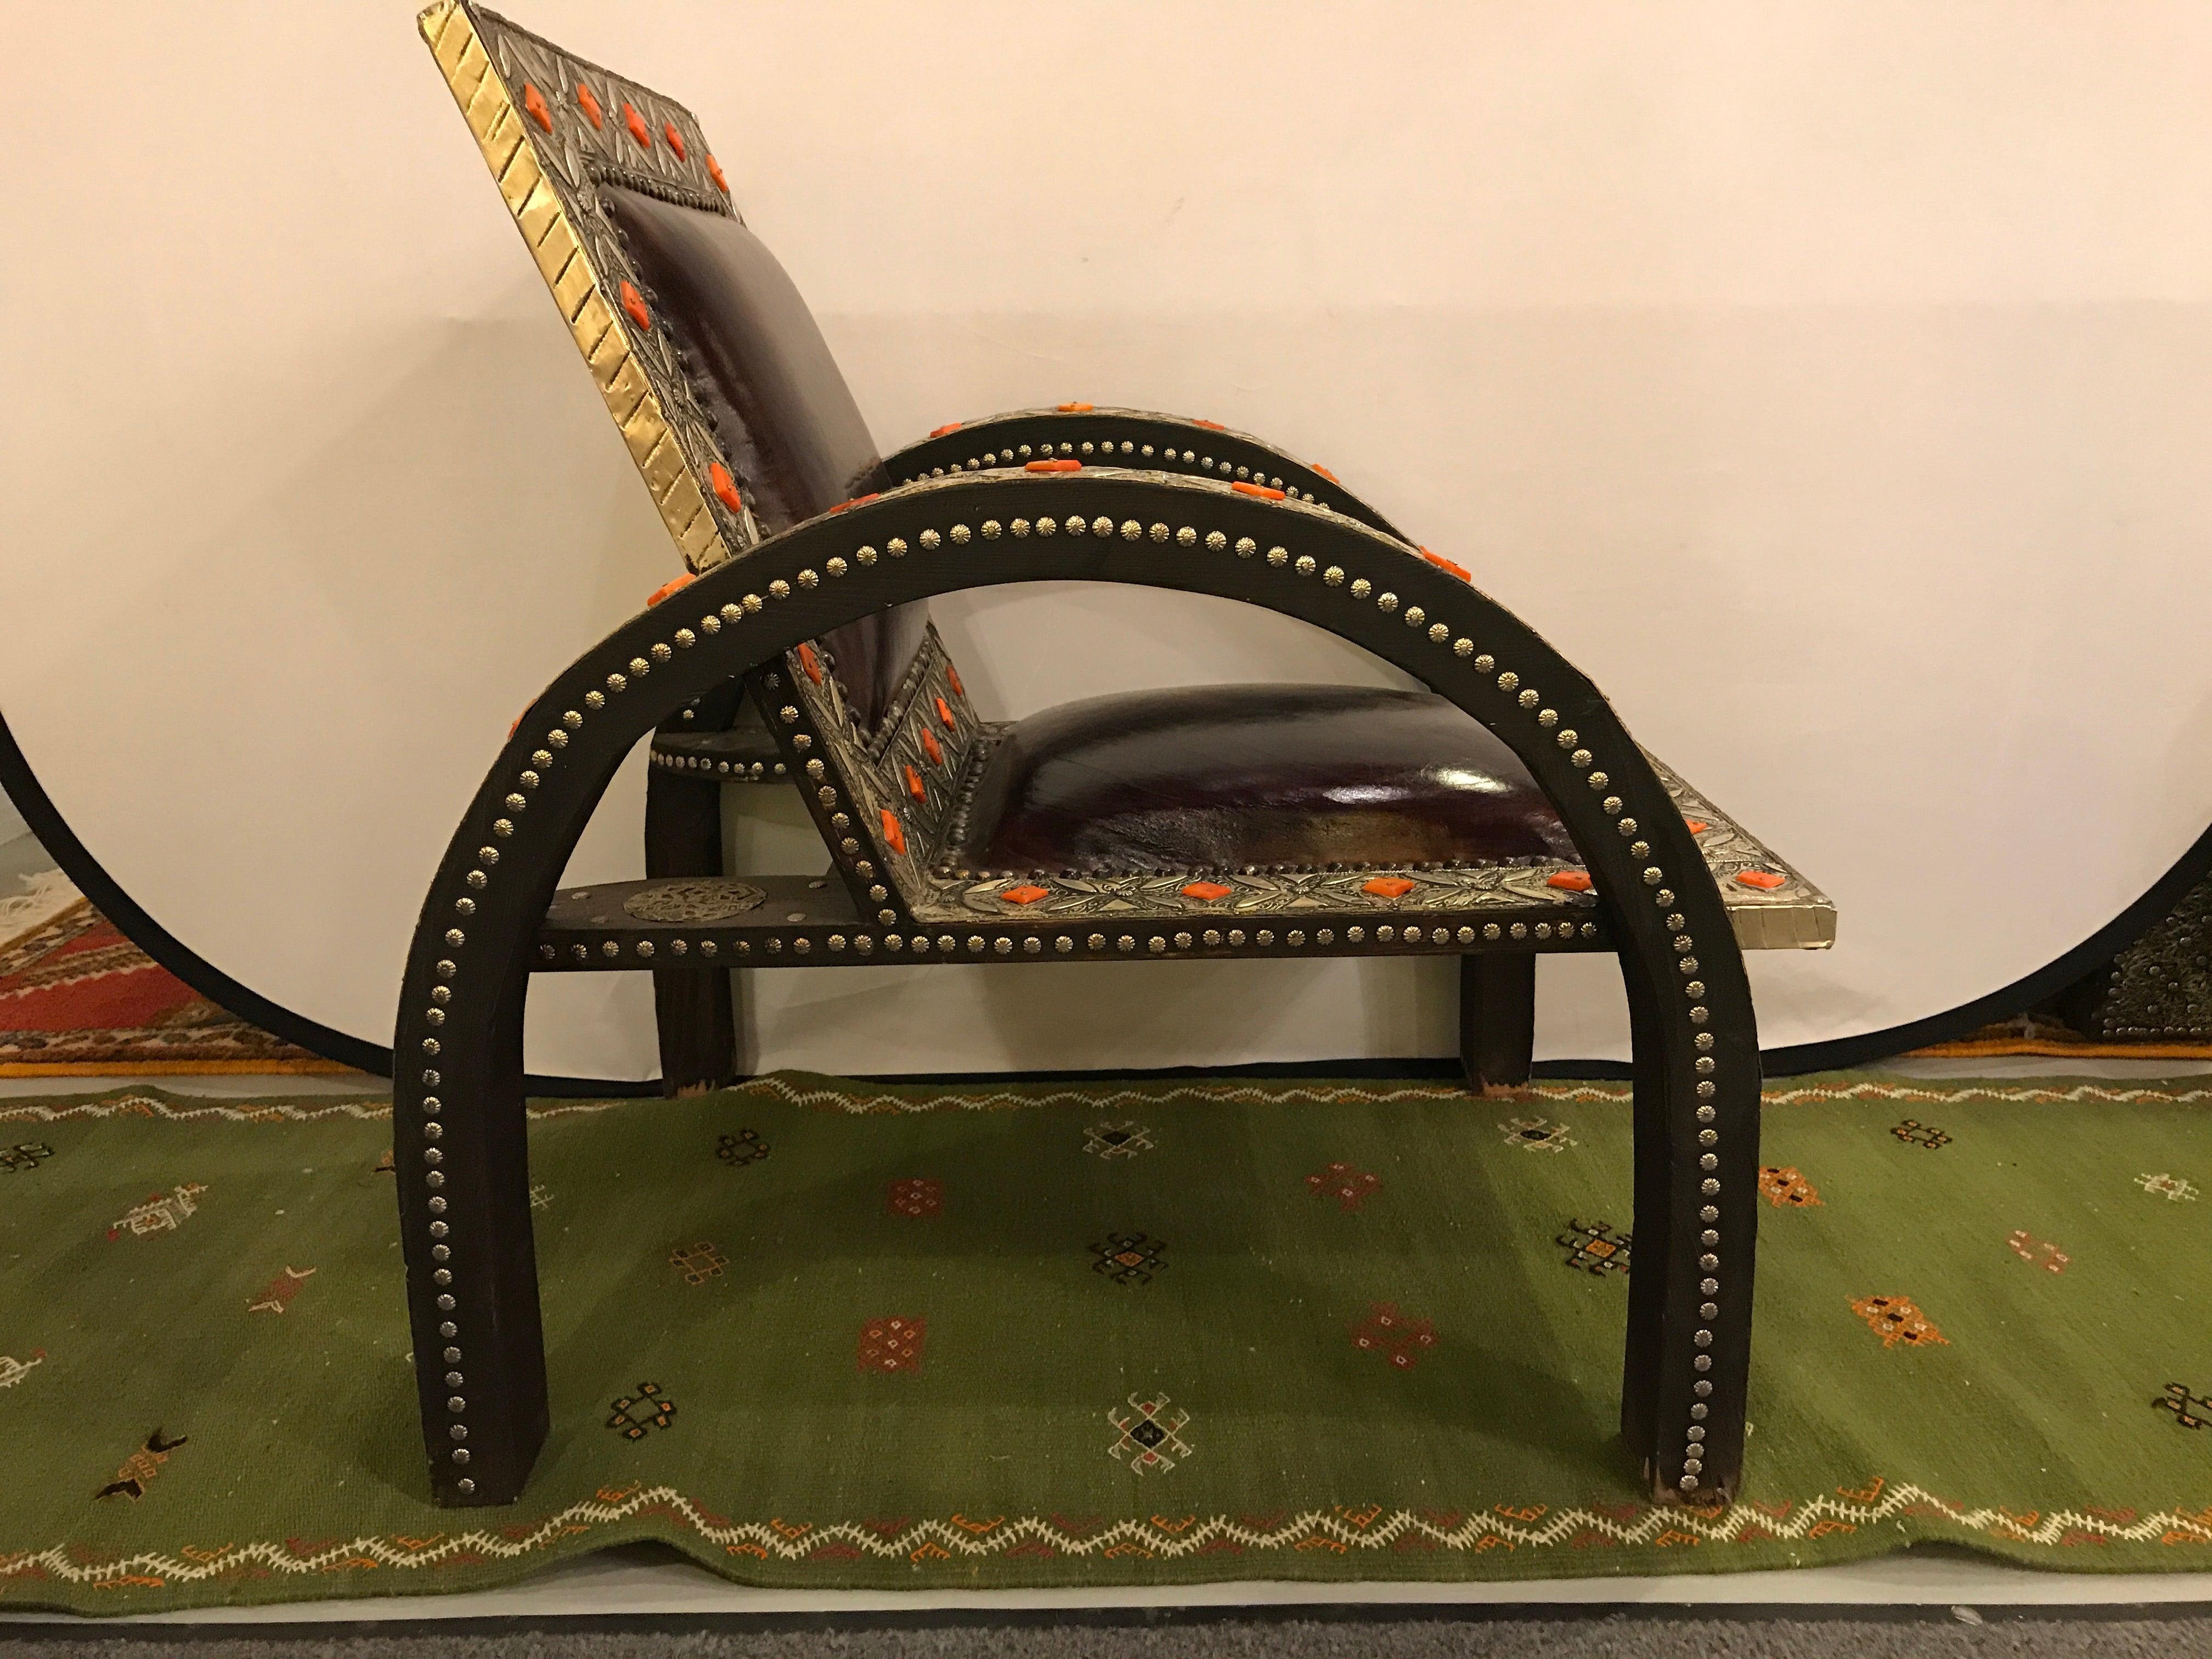 Armchair Royal style camel bone, leather and brass inlay
Armchair Royal style camel bone. This armchair embodies the elite craftsmanship and nimble imagination of traditional Moroccan artisans. Constructed from silver metal, inlaid with